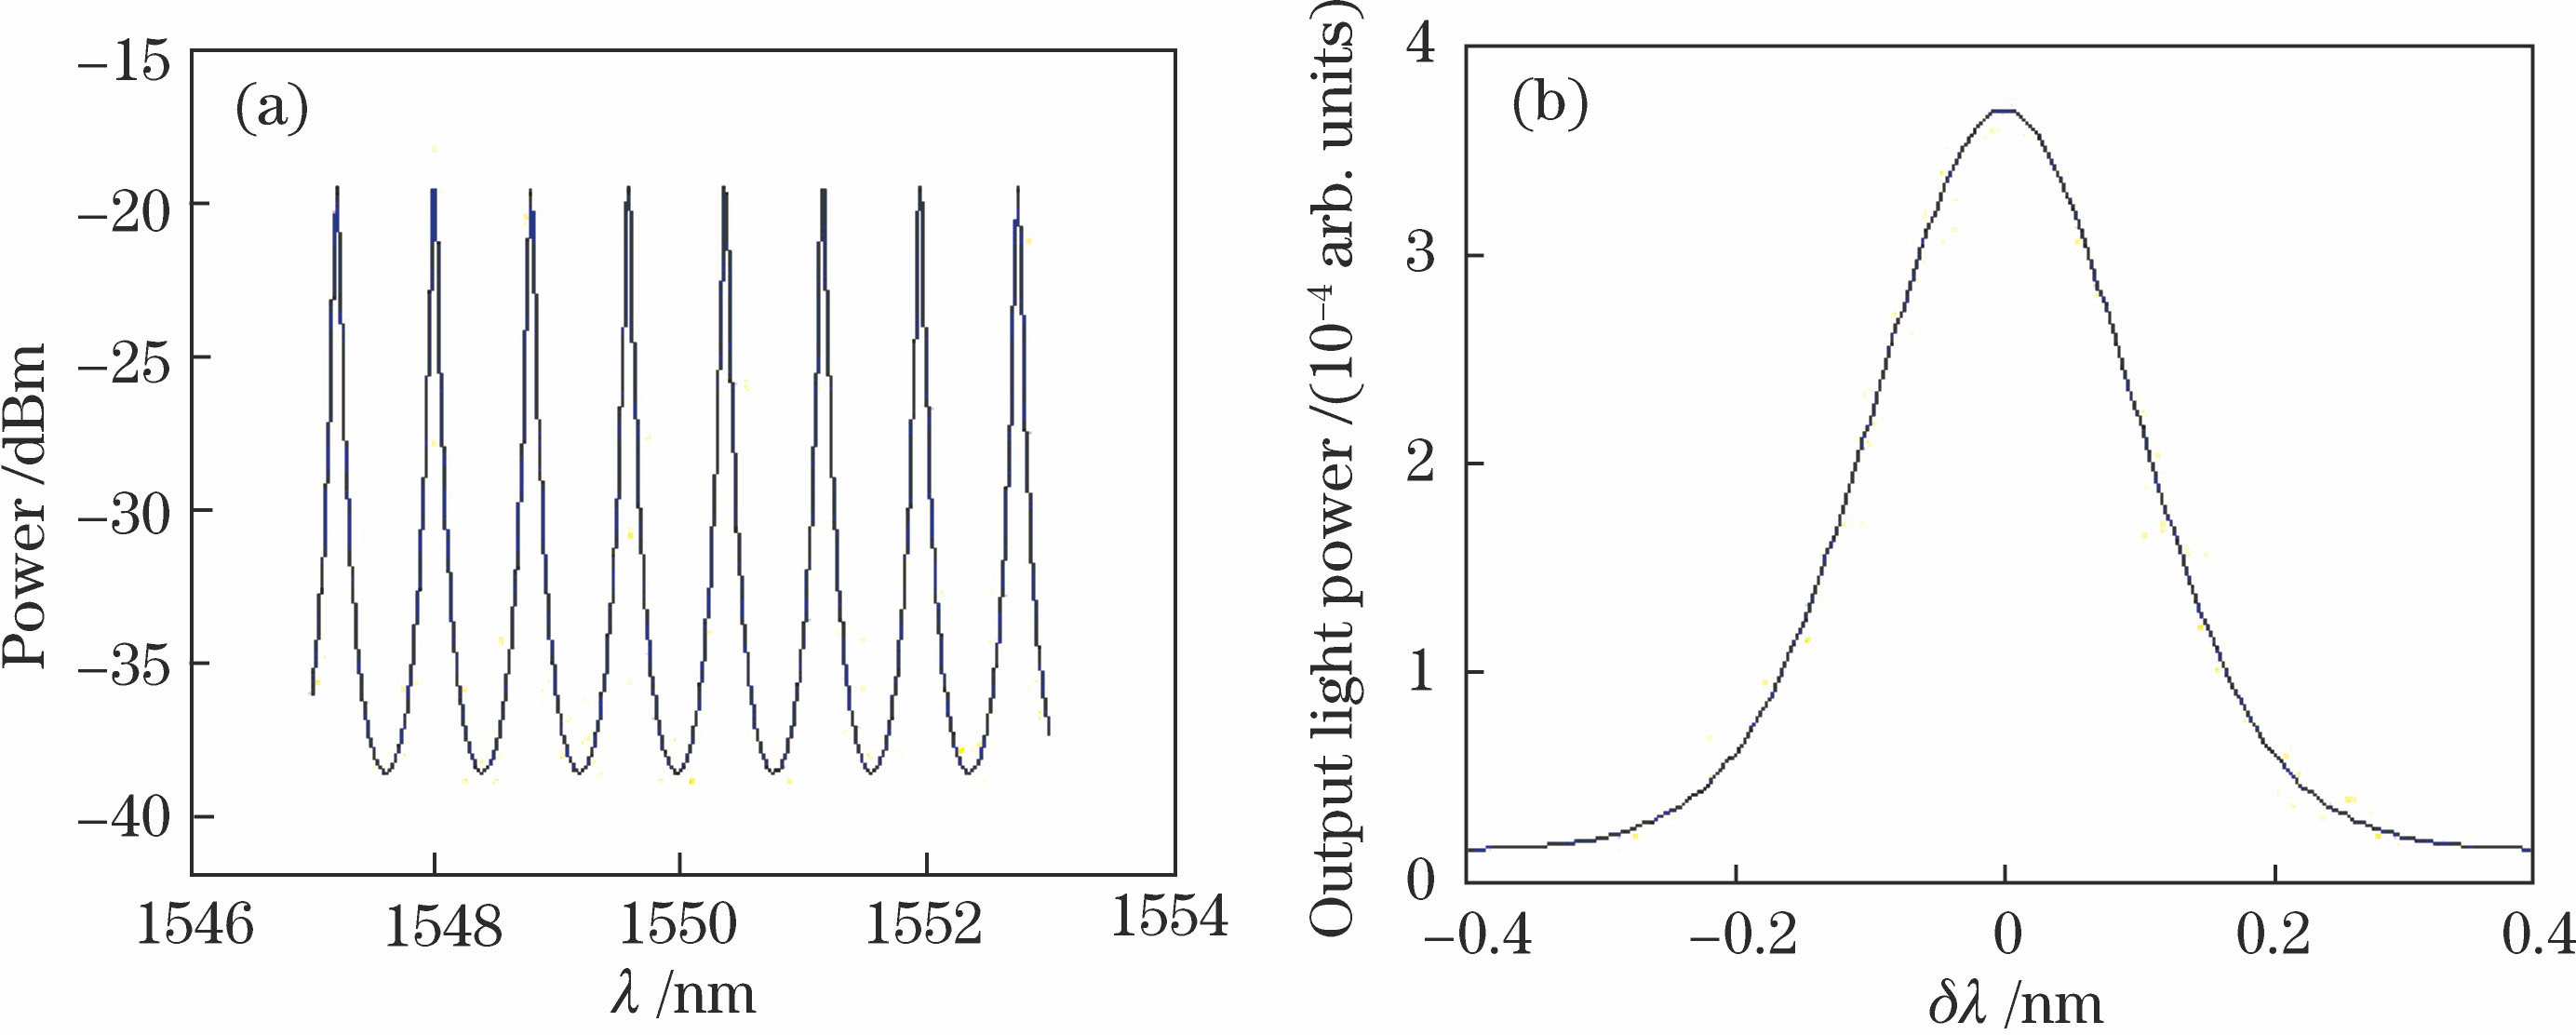 Simulation results. (a) Transmission spectrum of FFP filter; (b) relationship between output optical power and wavelength difference δλ